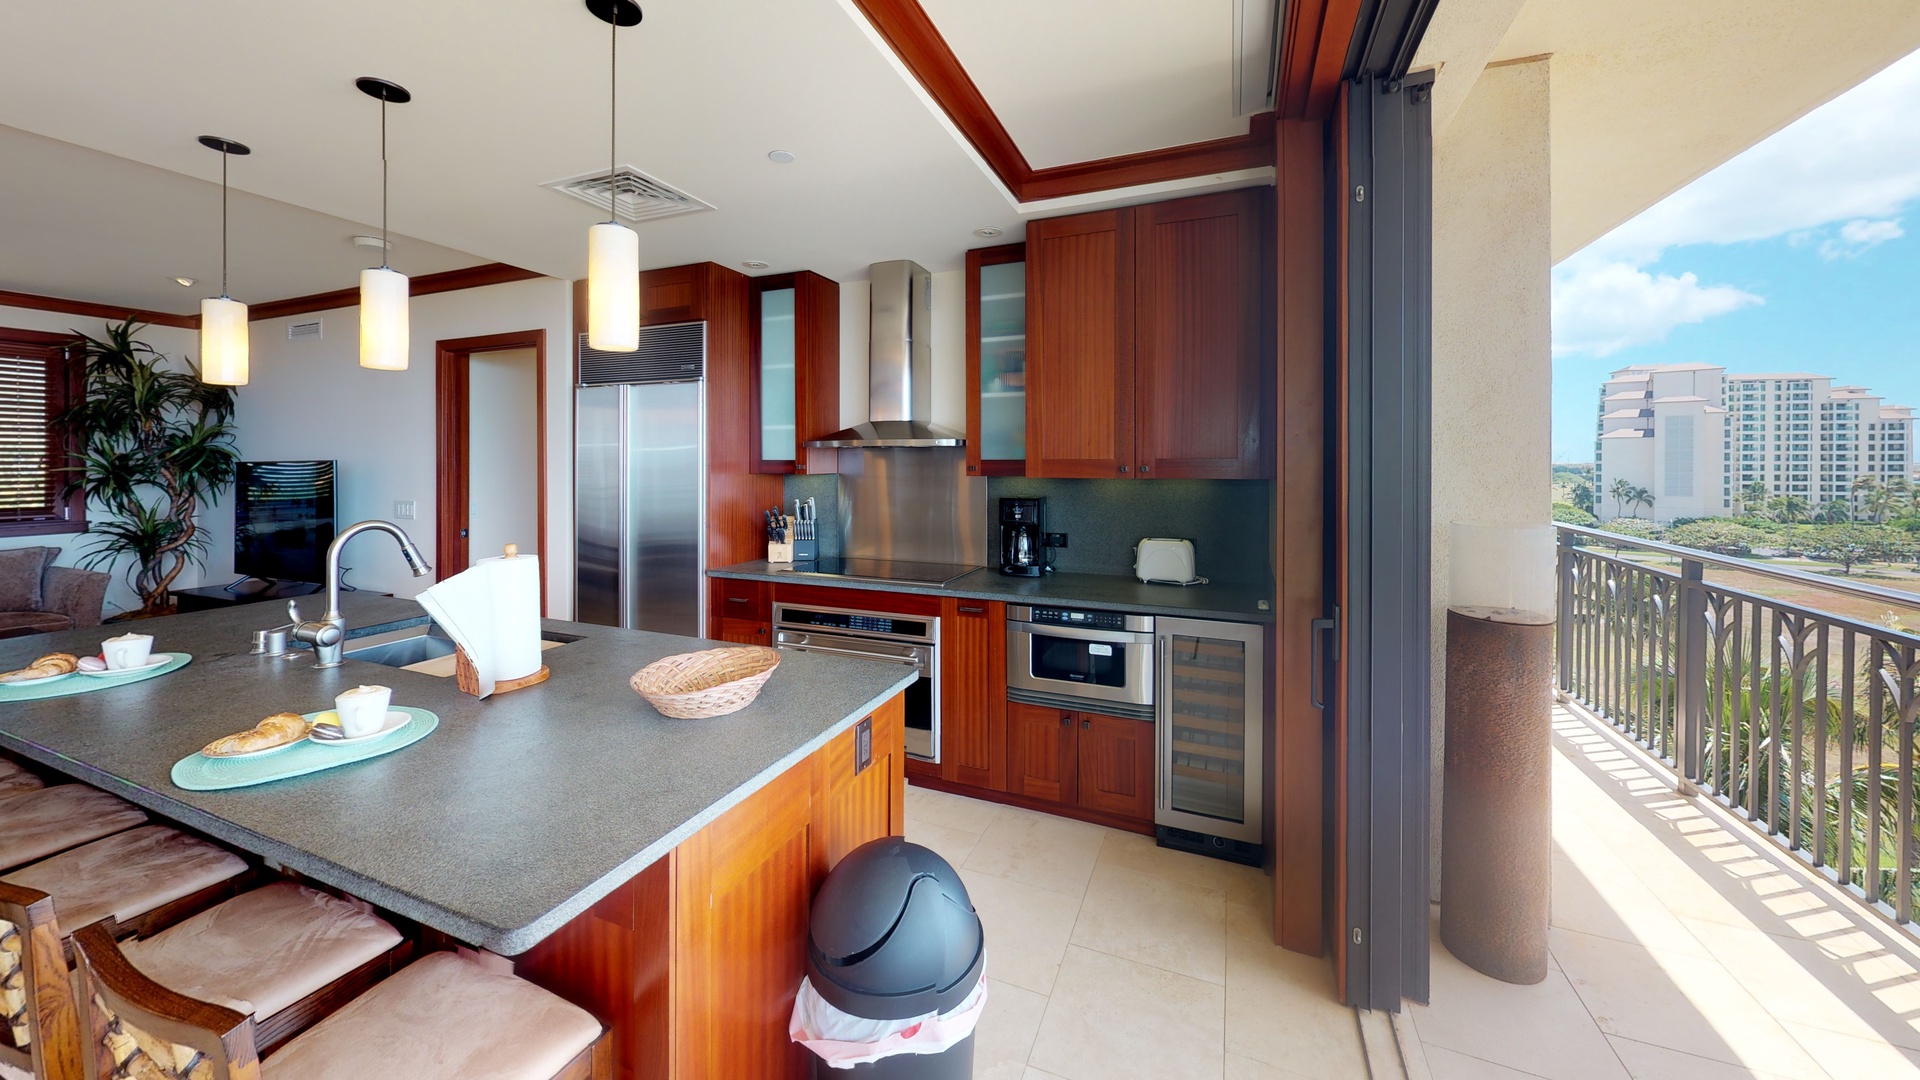 Kapolei Vacation Rentals, Ko Olina Beach Villas B701 - The fully equipped kitchen with stainless steel appliances.